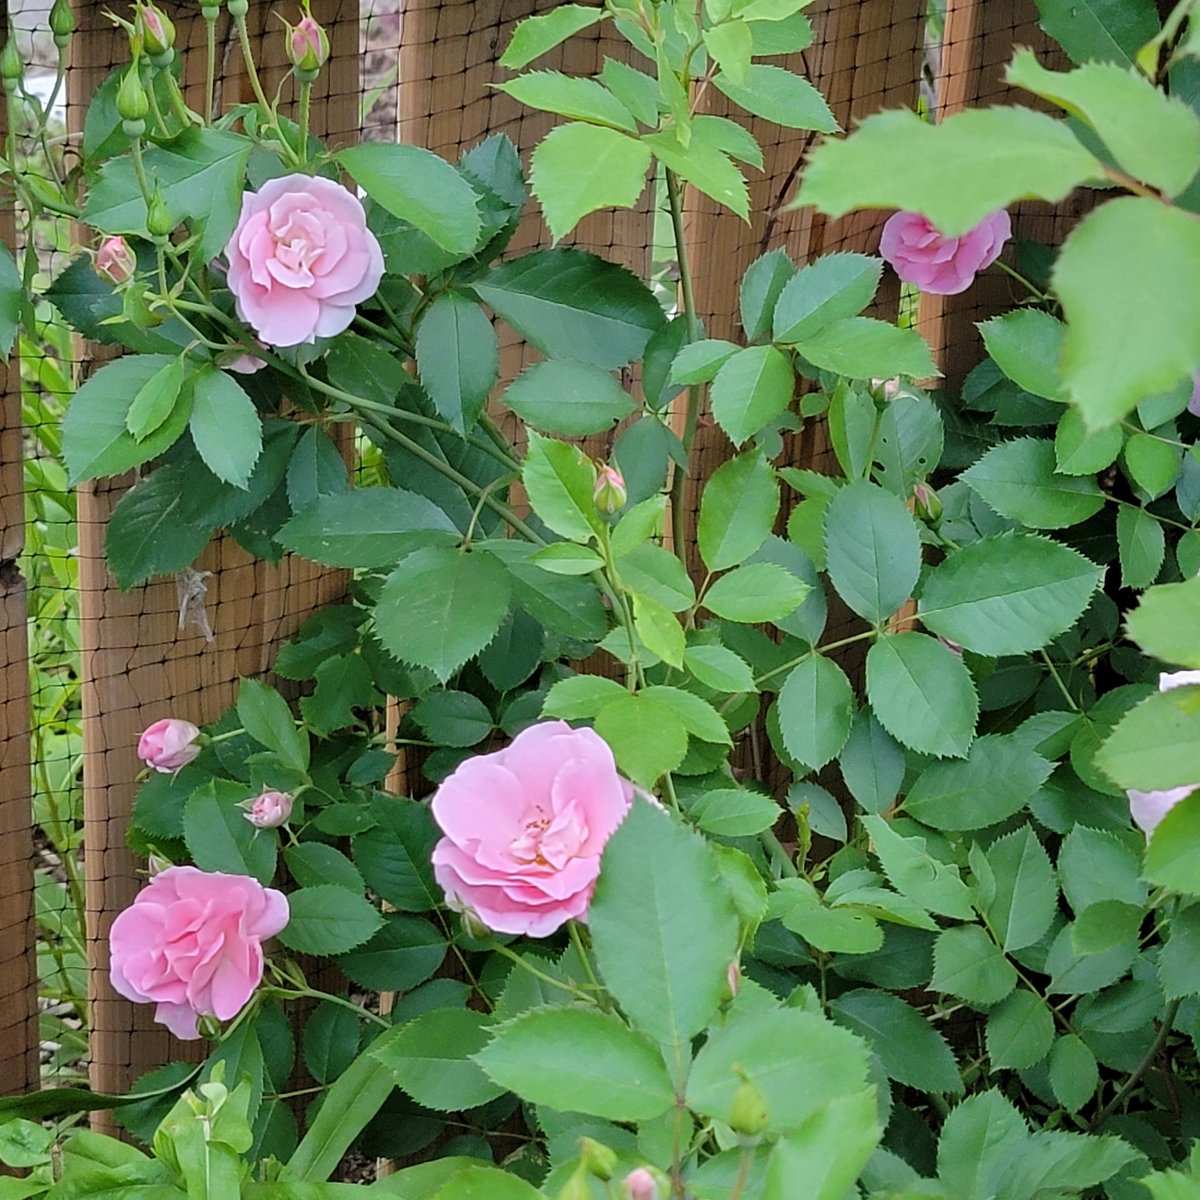 The roses are coming on. Mostly #hardy Canadian bred roses in my gardens. #RoseWednesday #Flowers #mygarden #gardening #Canadagardening